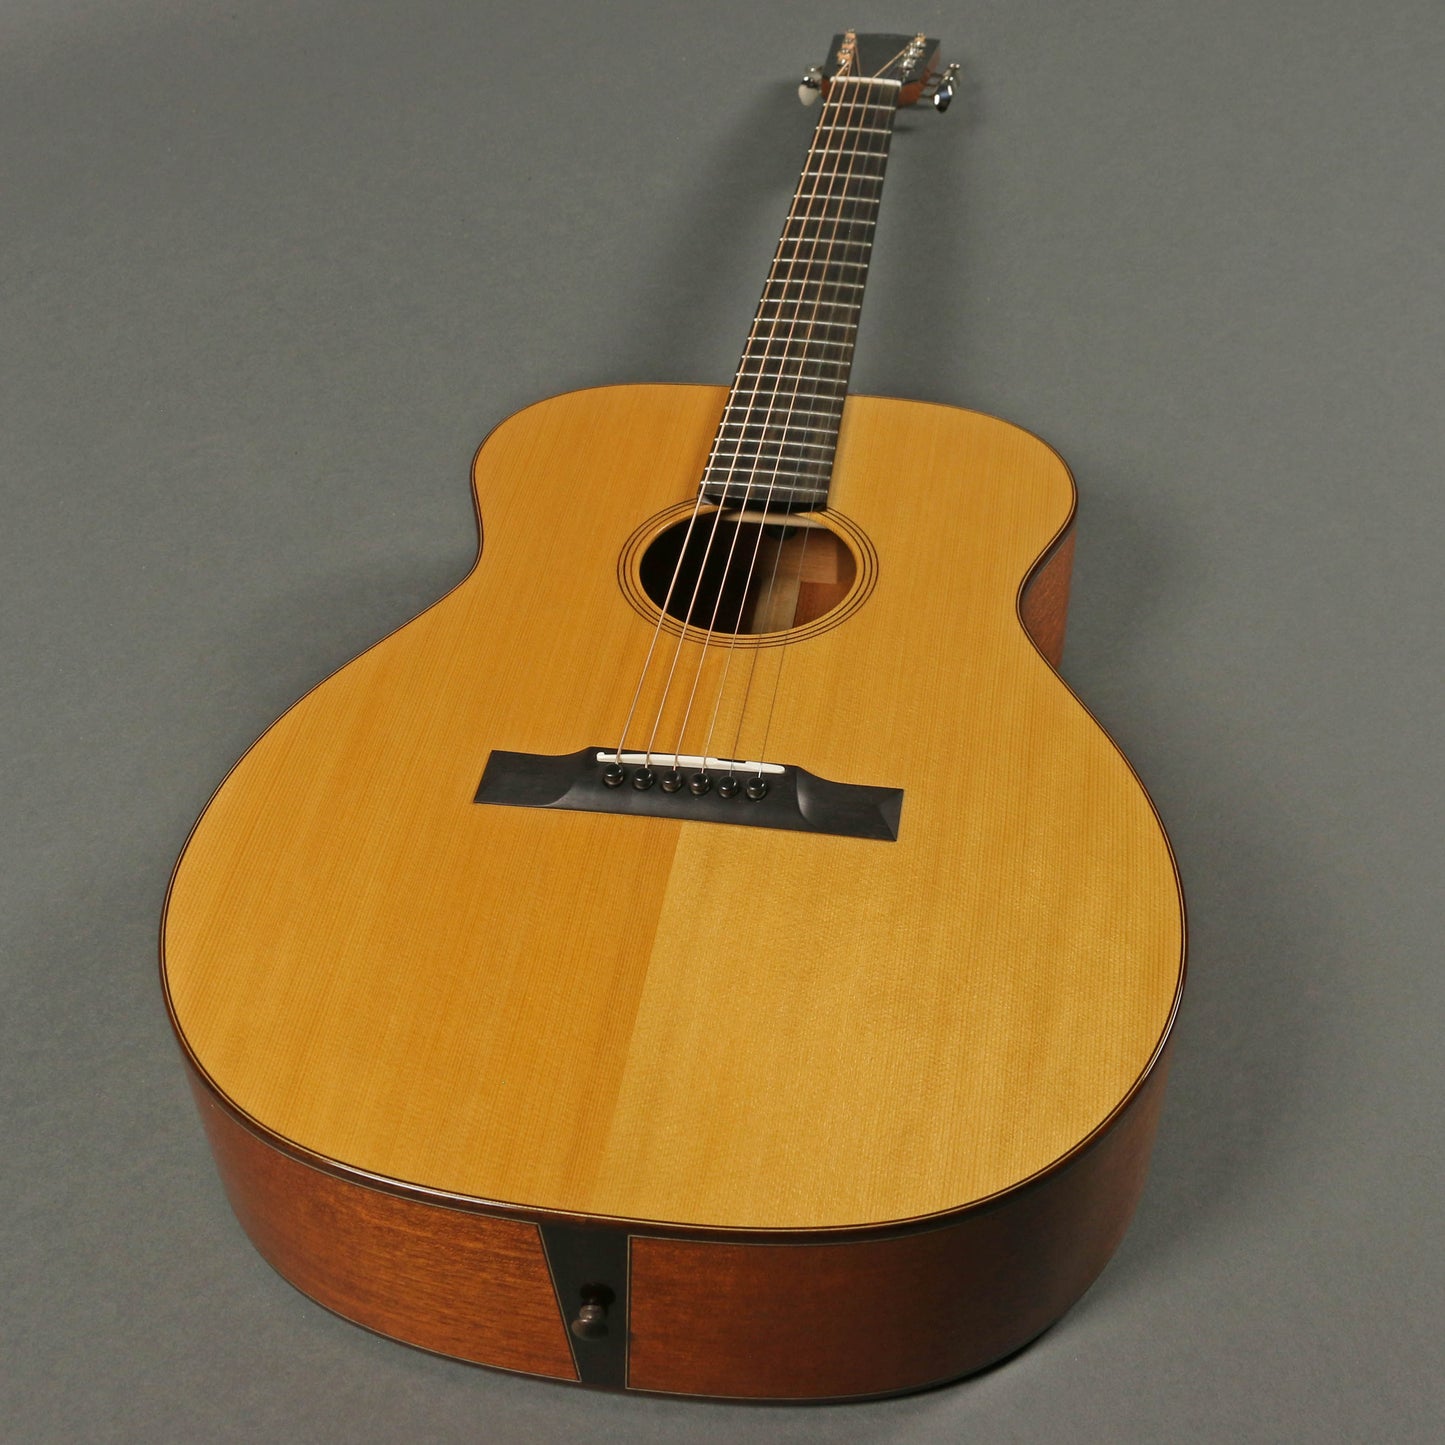 2013 Wilborn Orchestra Model Acoustic